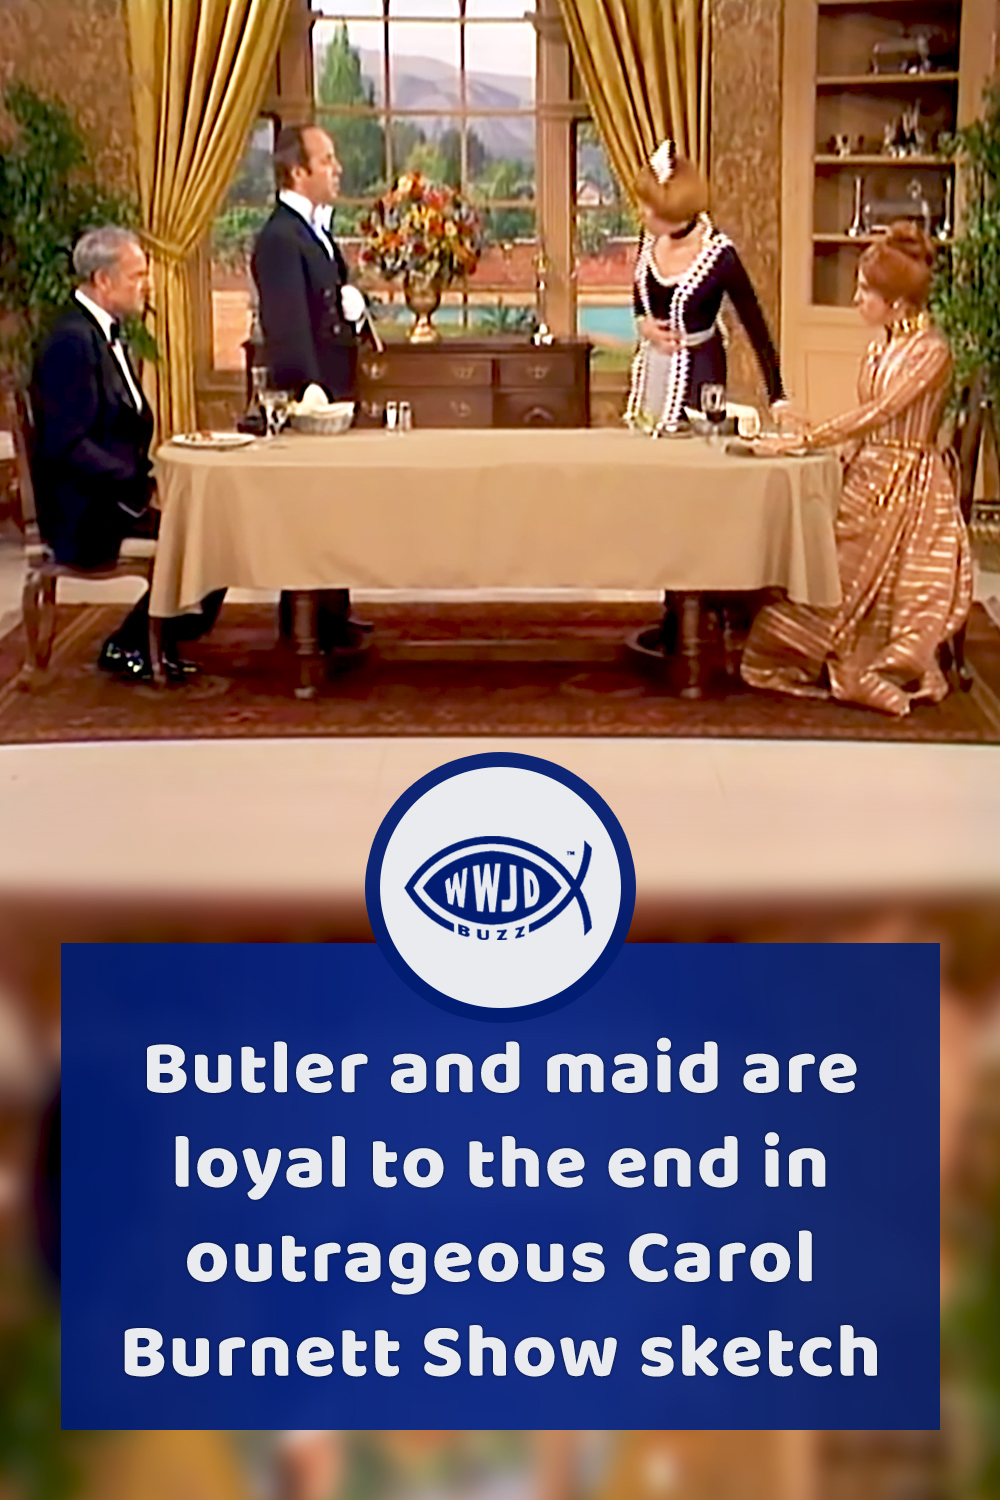 Butler and maid are loyal to the end in outrageous Carol Burnett Show sketch